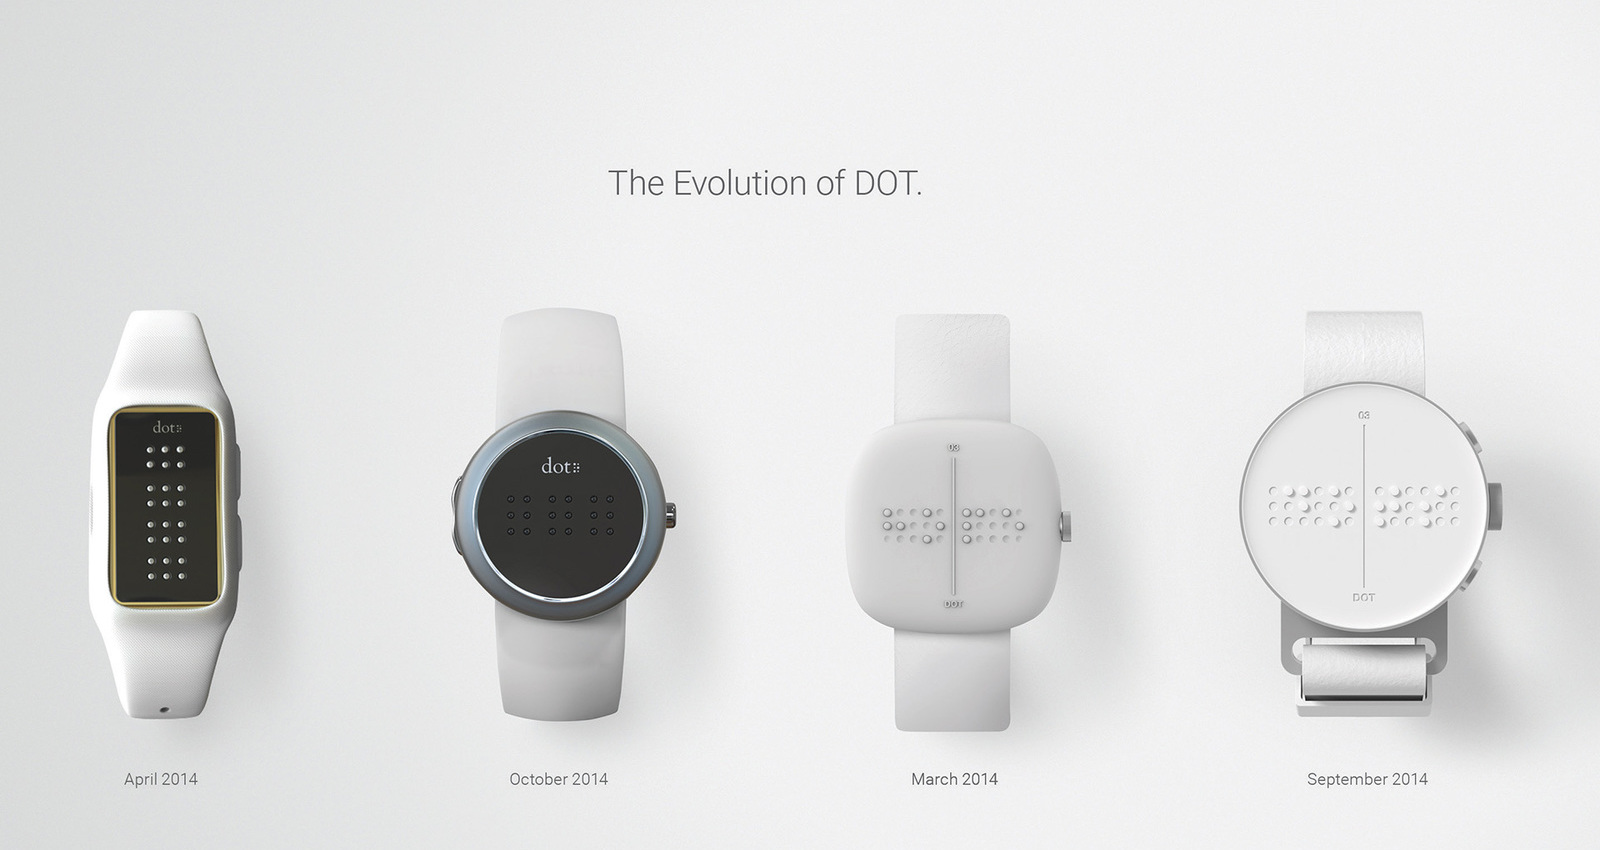 DOT. The first Braille Smartwatch.